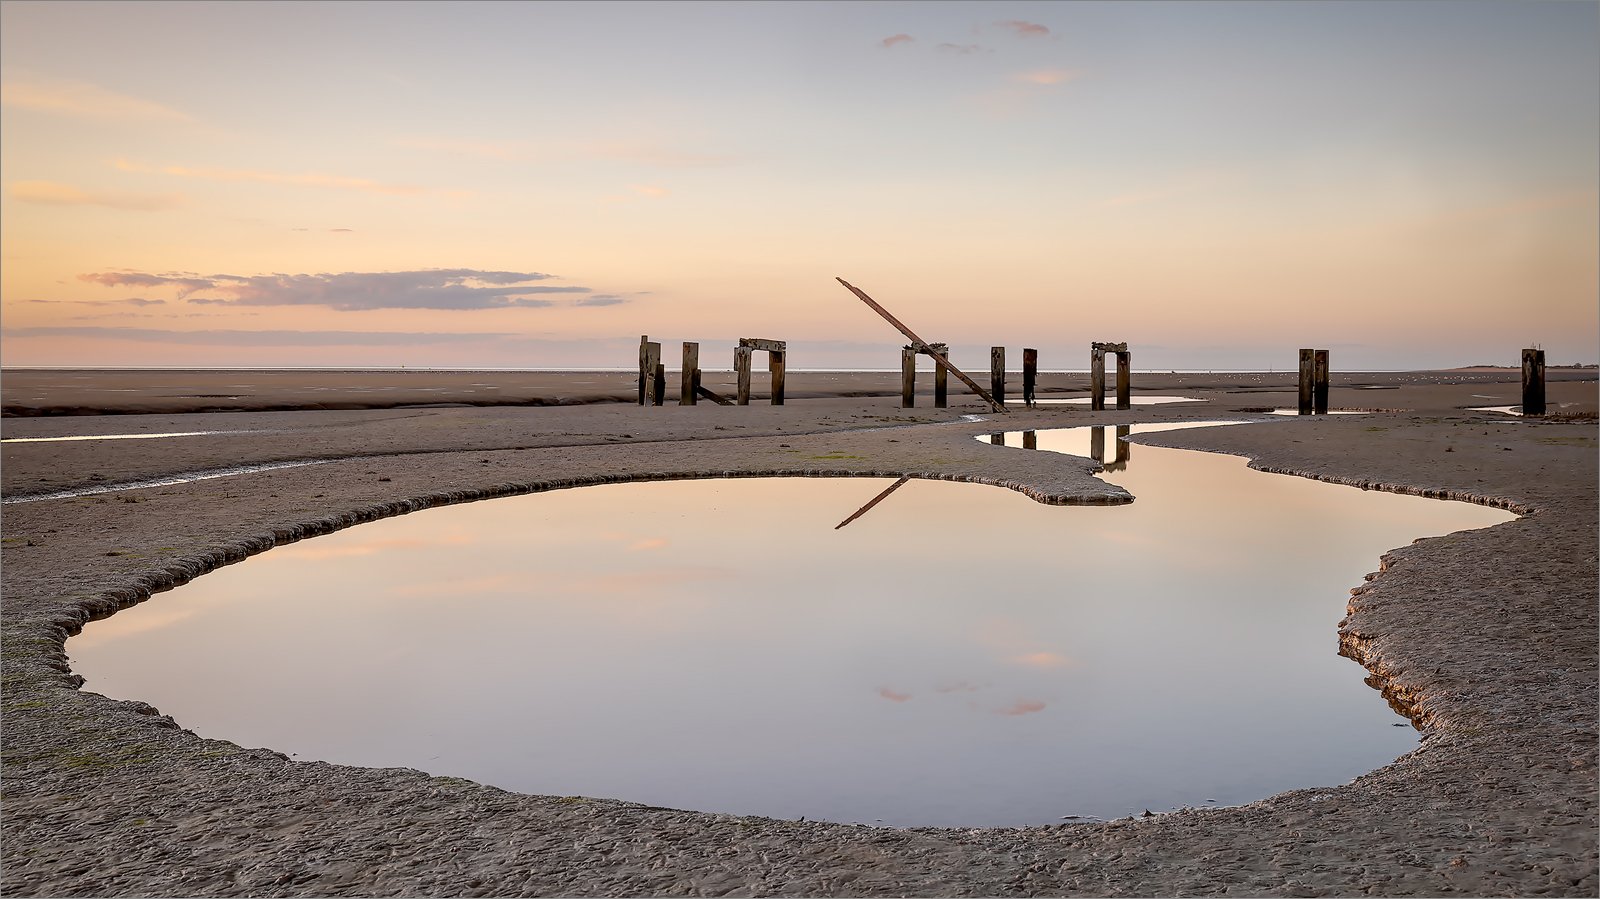 REMAINS OF THE COAL PIER AT SNETTISHAM - Maurice Young (Round 3 themed)